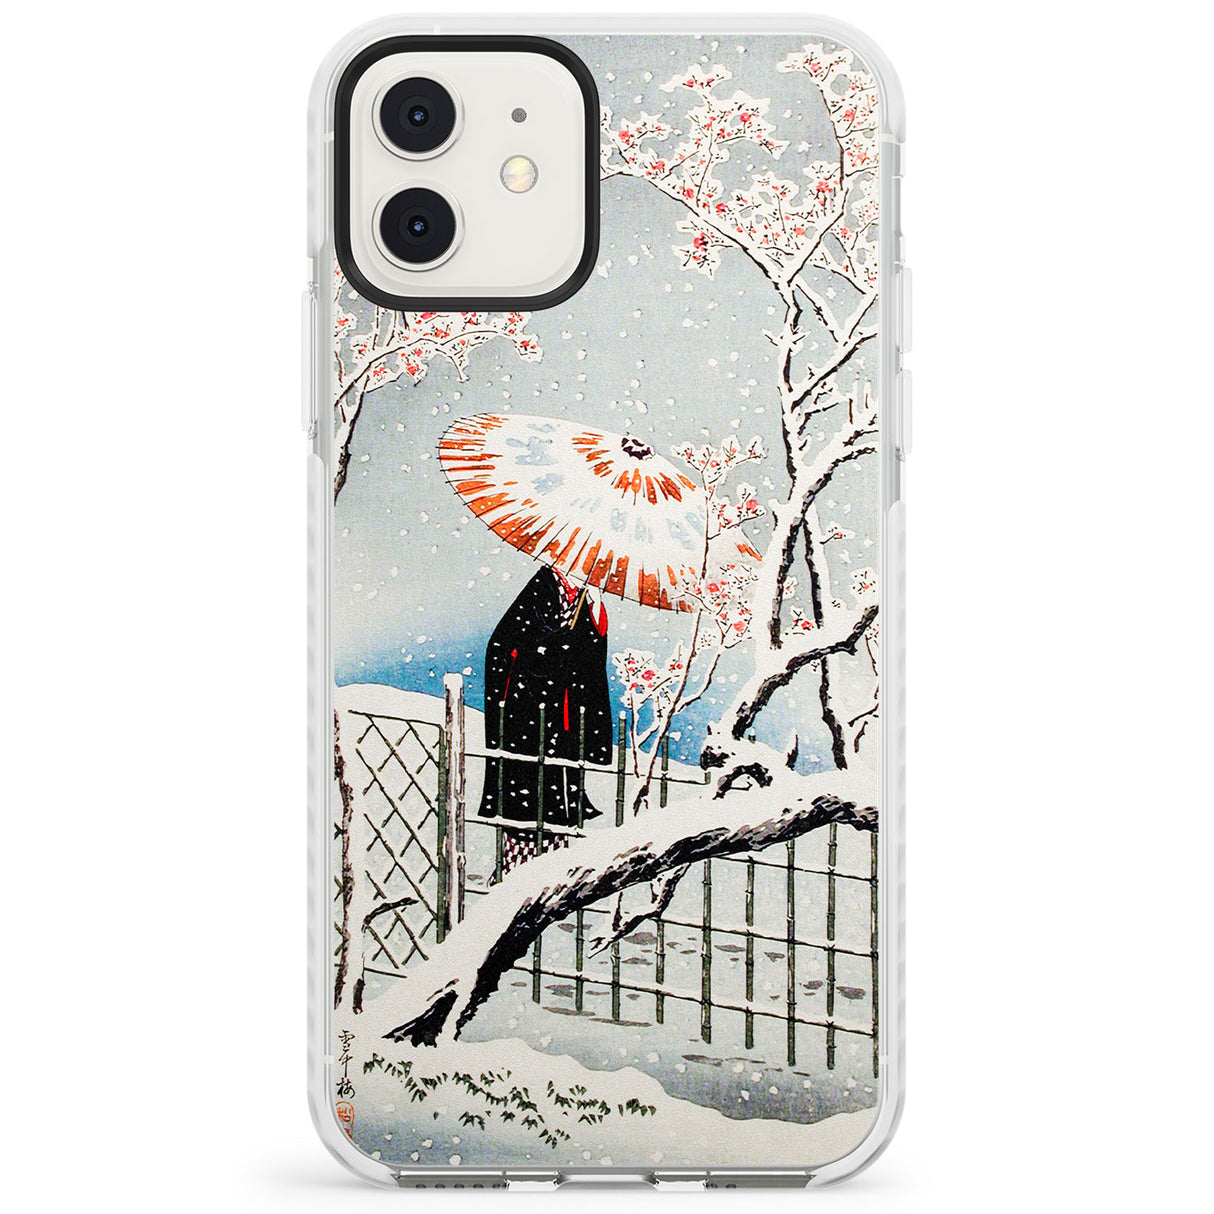 Plum Tree in Snow by Hiroaki Takahashi Impact Phone Case for iPhone 11, iphone 12